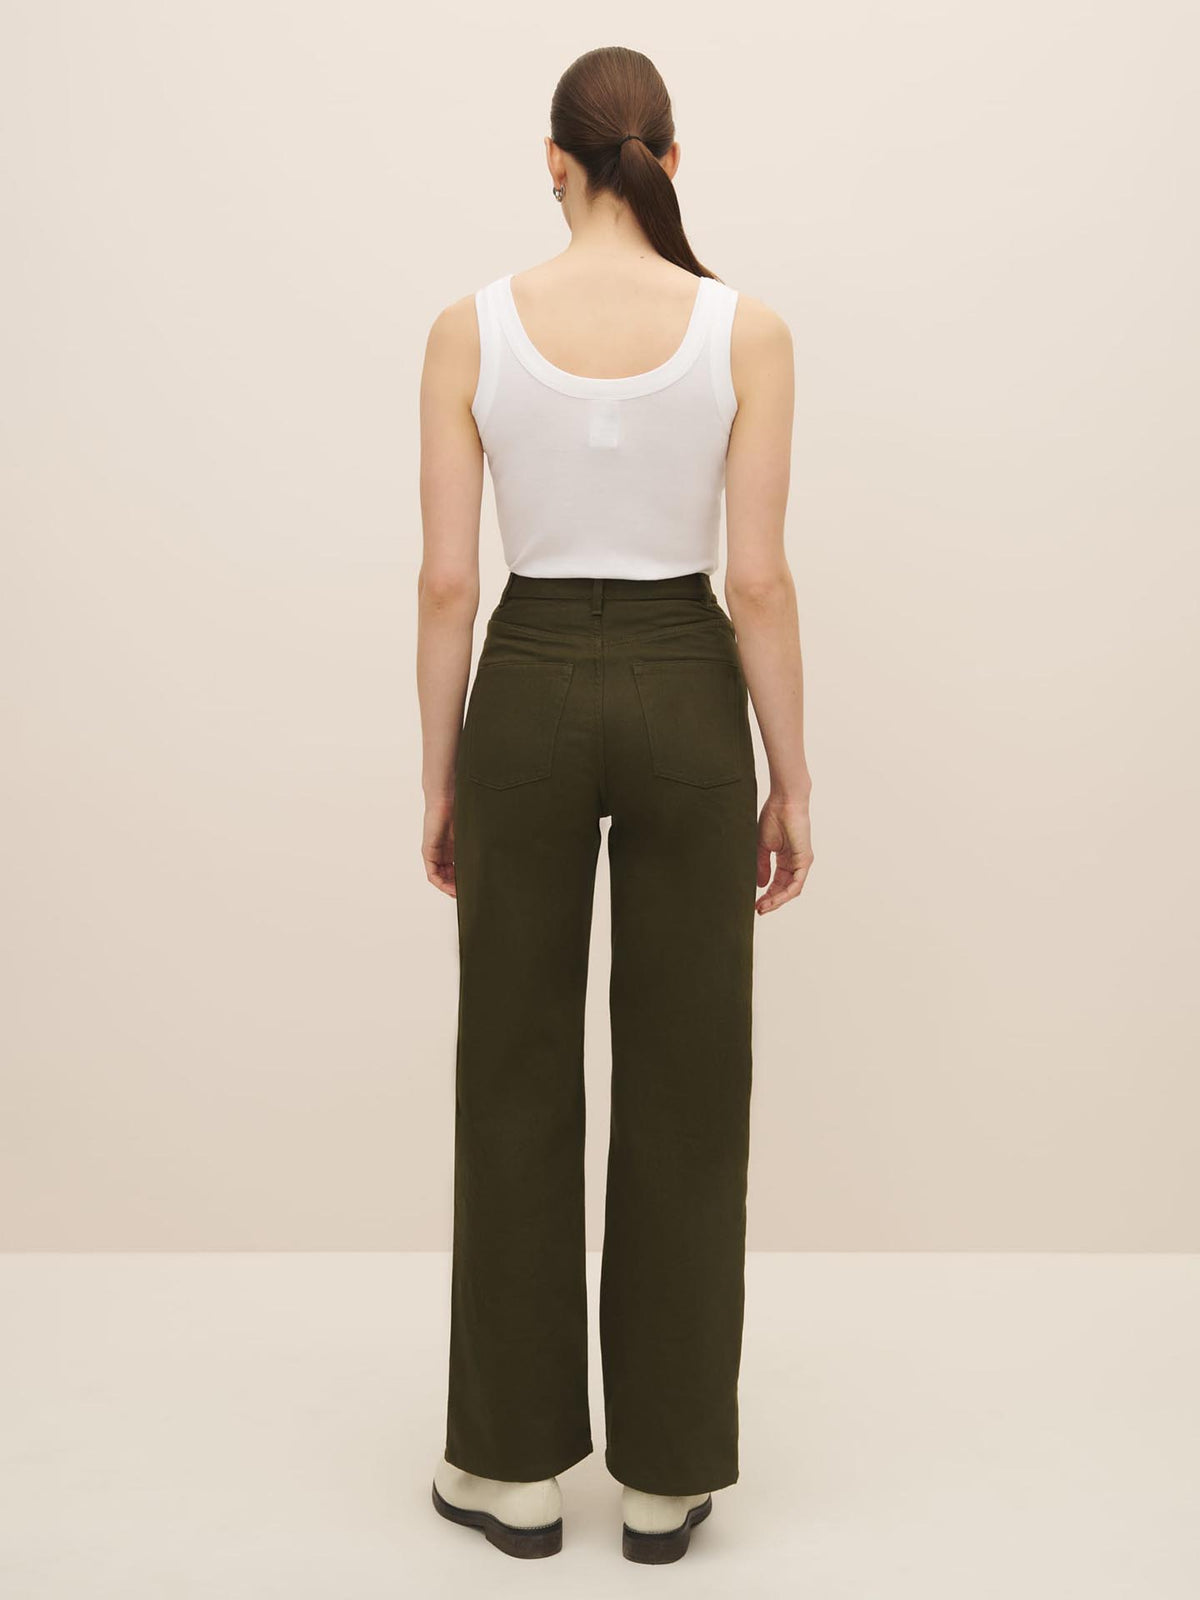 The back view of a woman wearing Straight Leg Jeans – Khaki Denim in olive green, made from organic cotton by Kowtow.